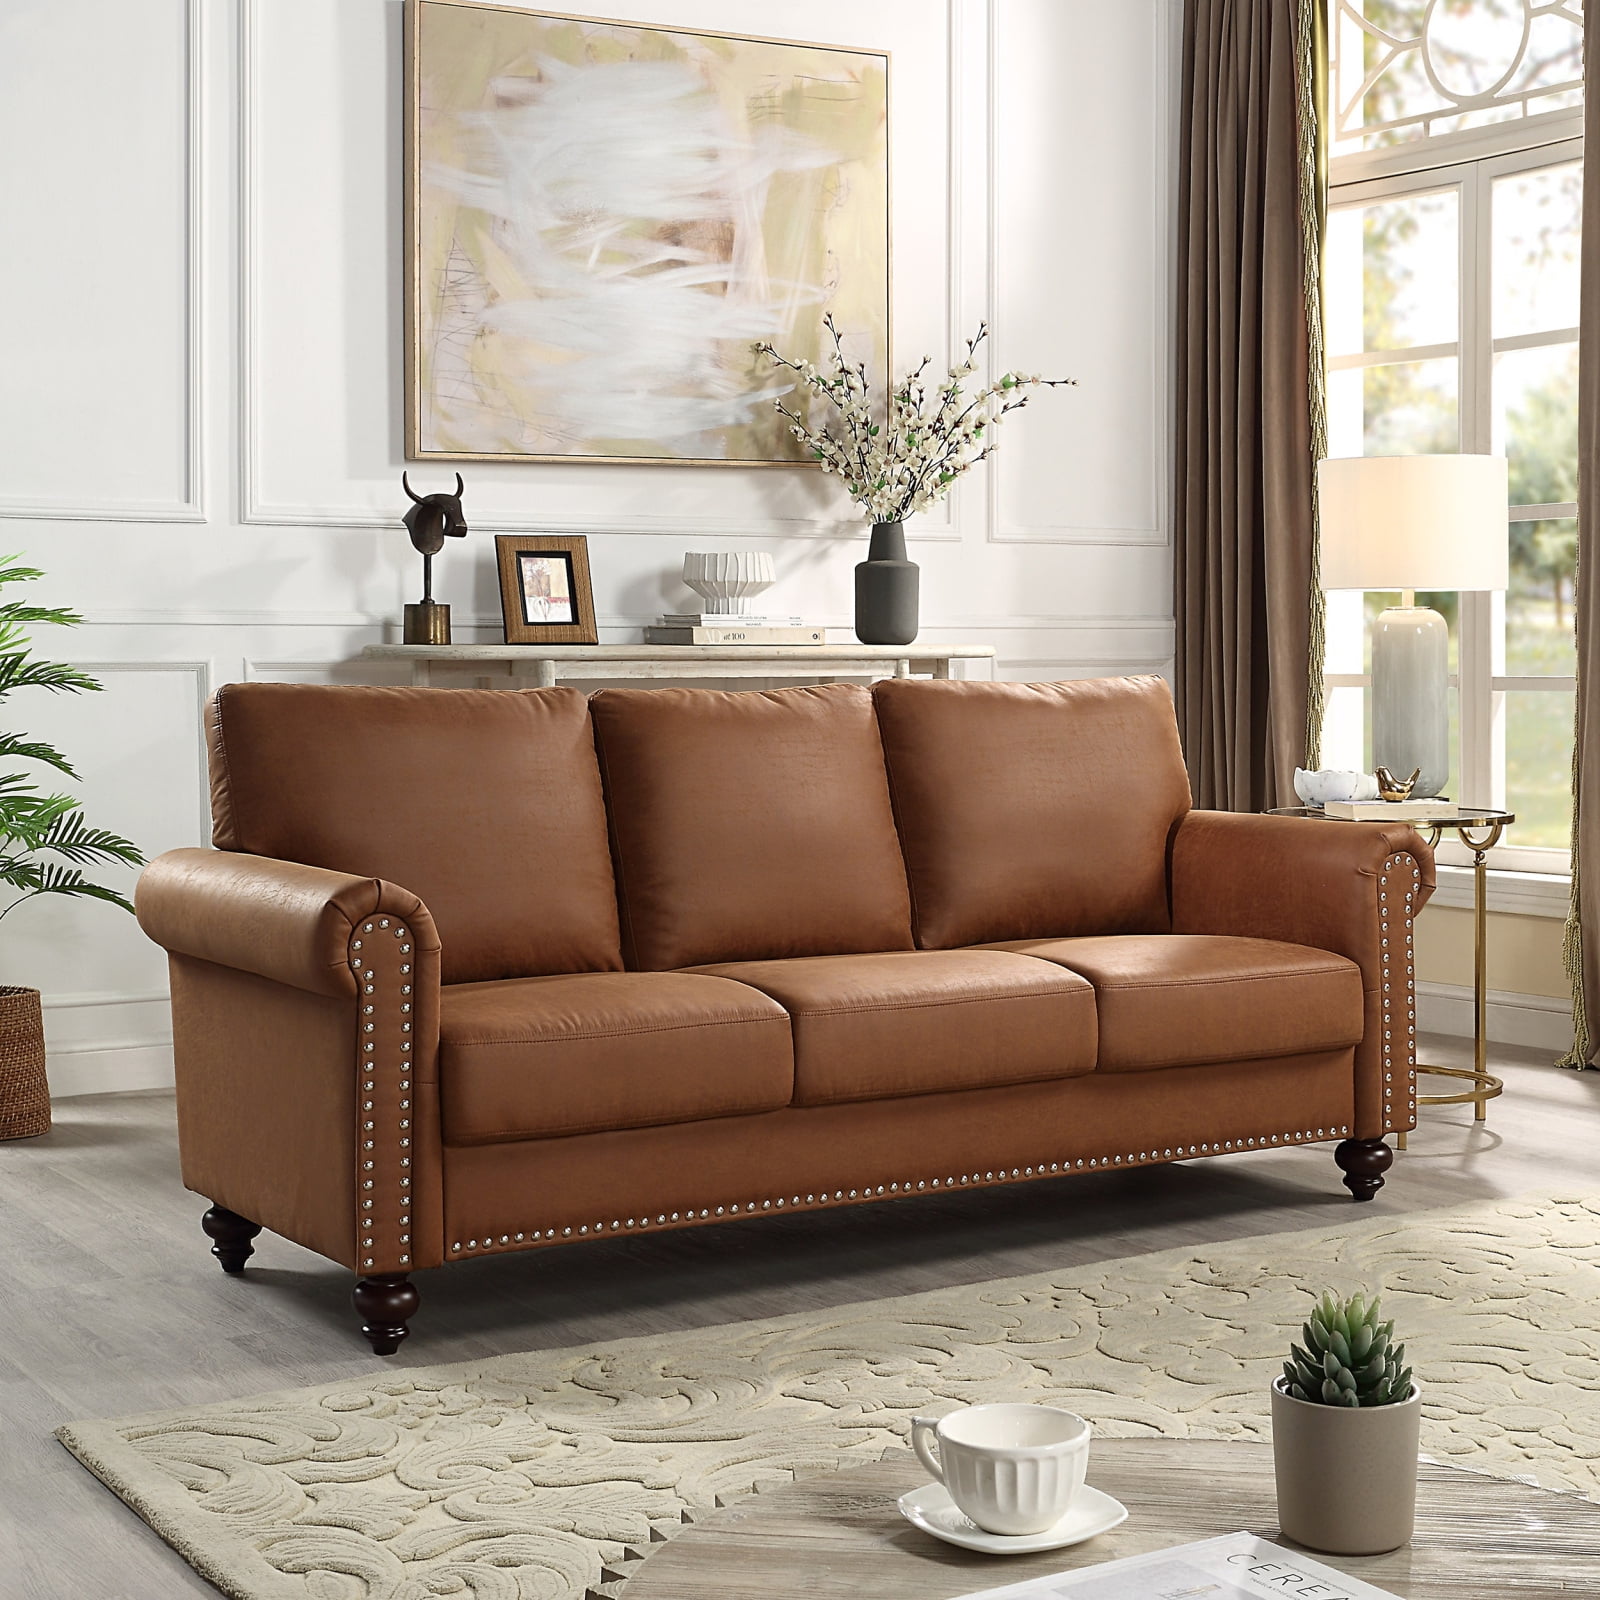 Leathaire Fabric Upholstery sofa/Tufted Cushions/ Easy, Tool-Free ...